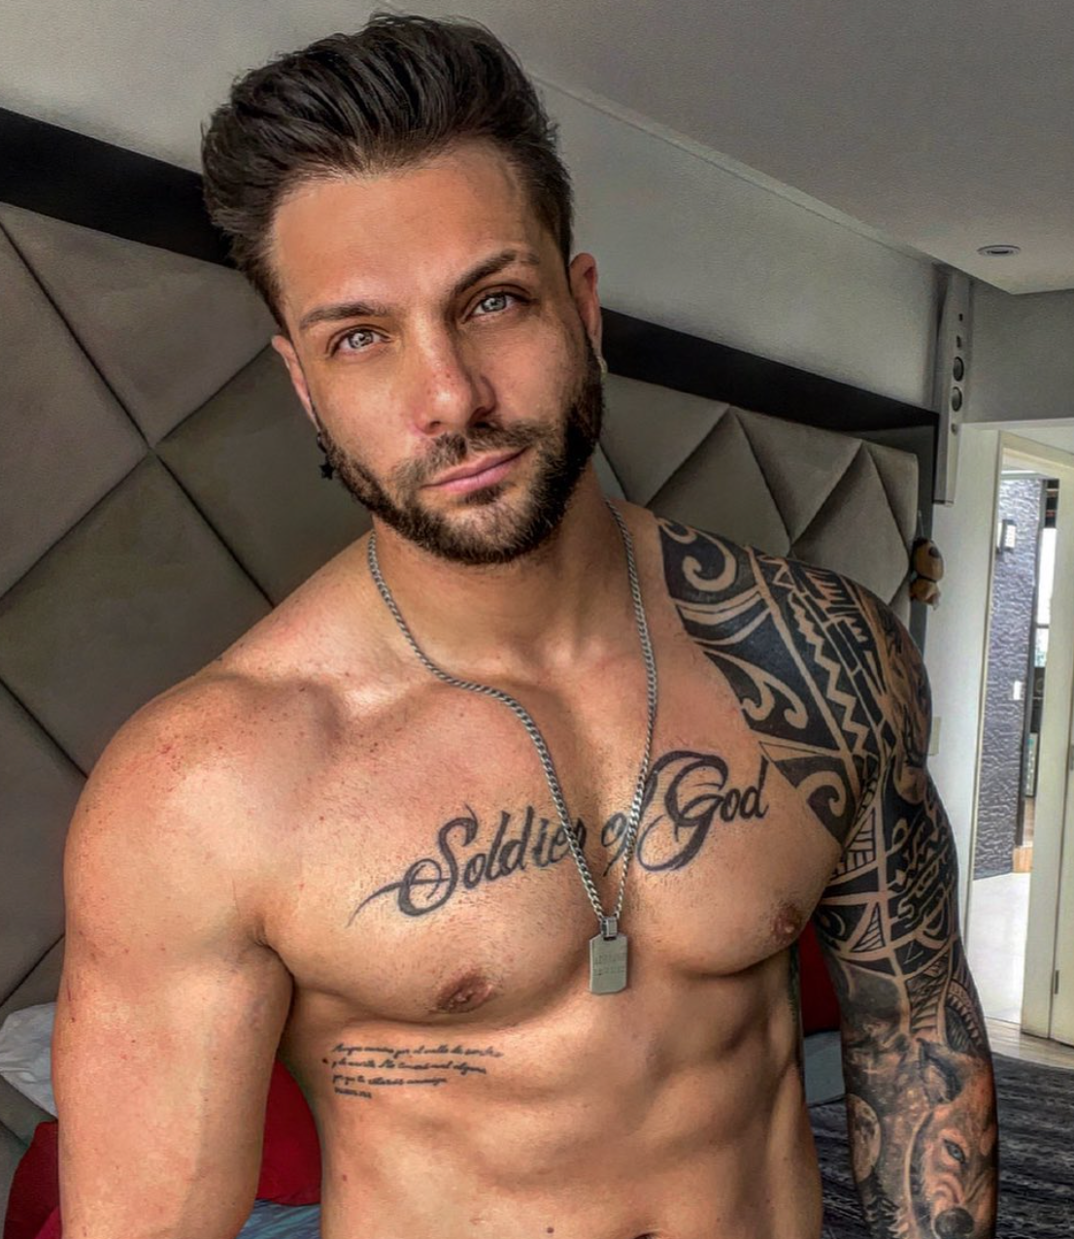 Peruvian reality star Nicola Porcella in a shirtless selfie